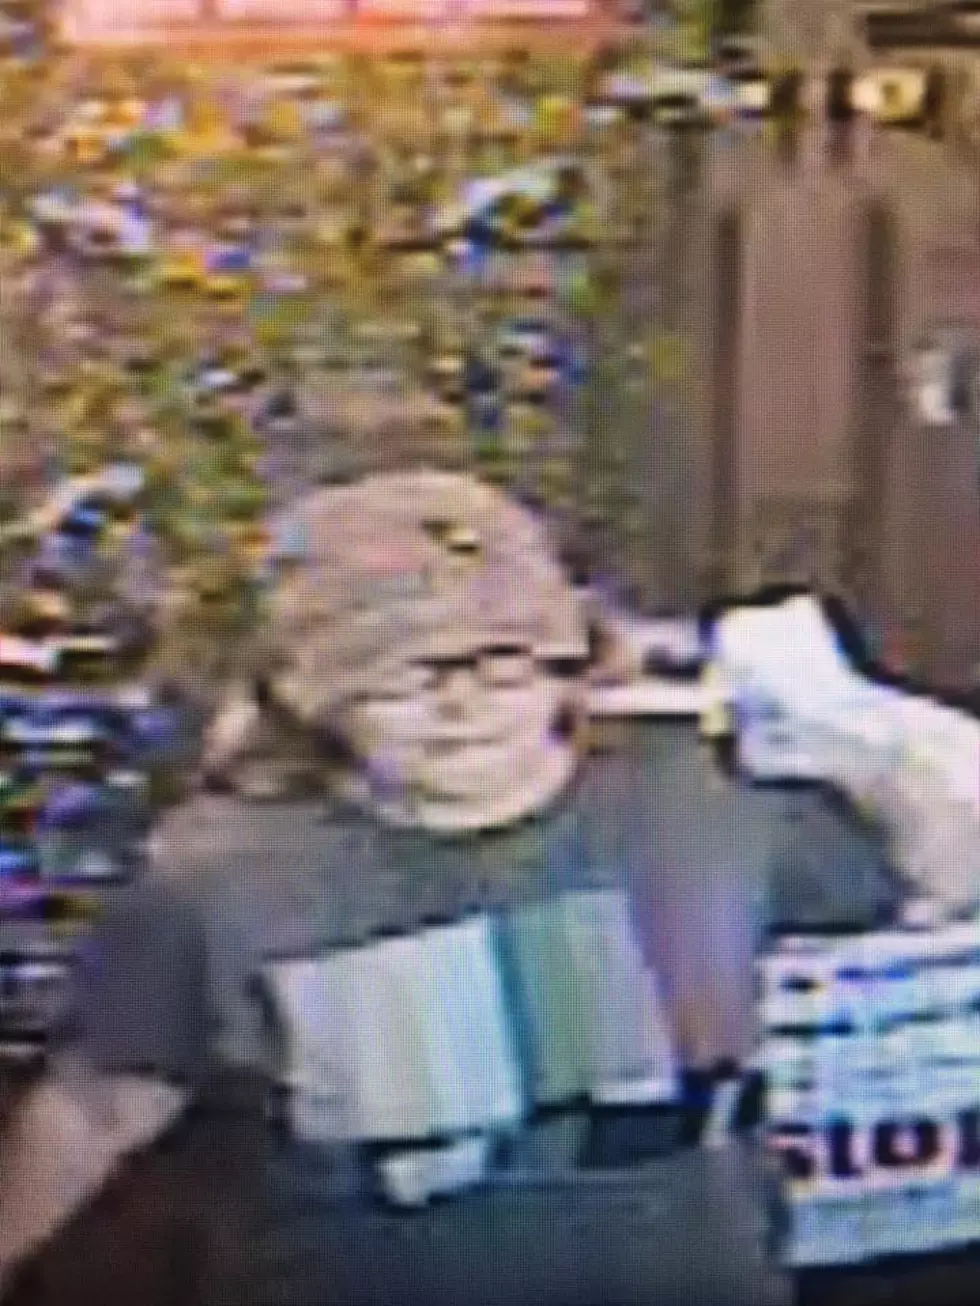 Police Still Seeking Suspect Who Stole 96-Year-Old Woman’s Purse